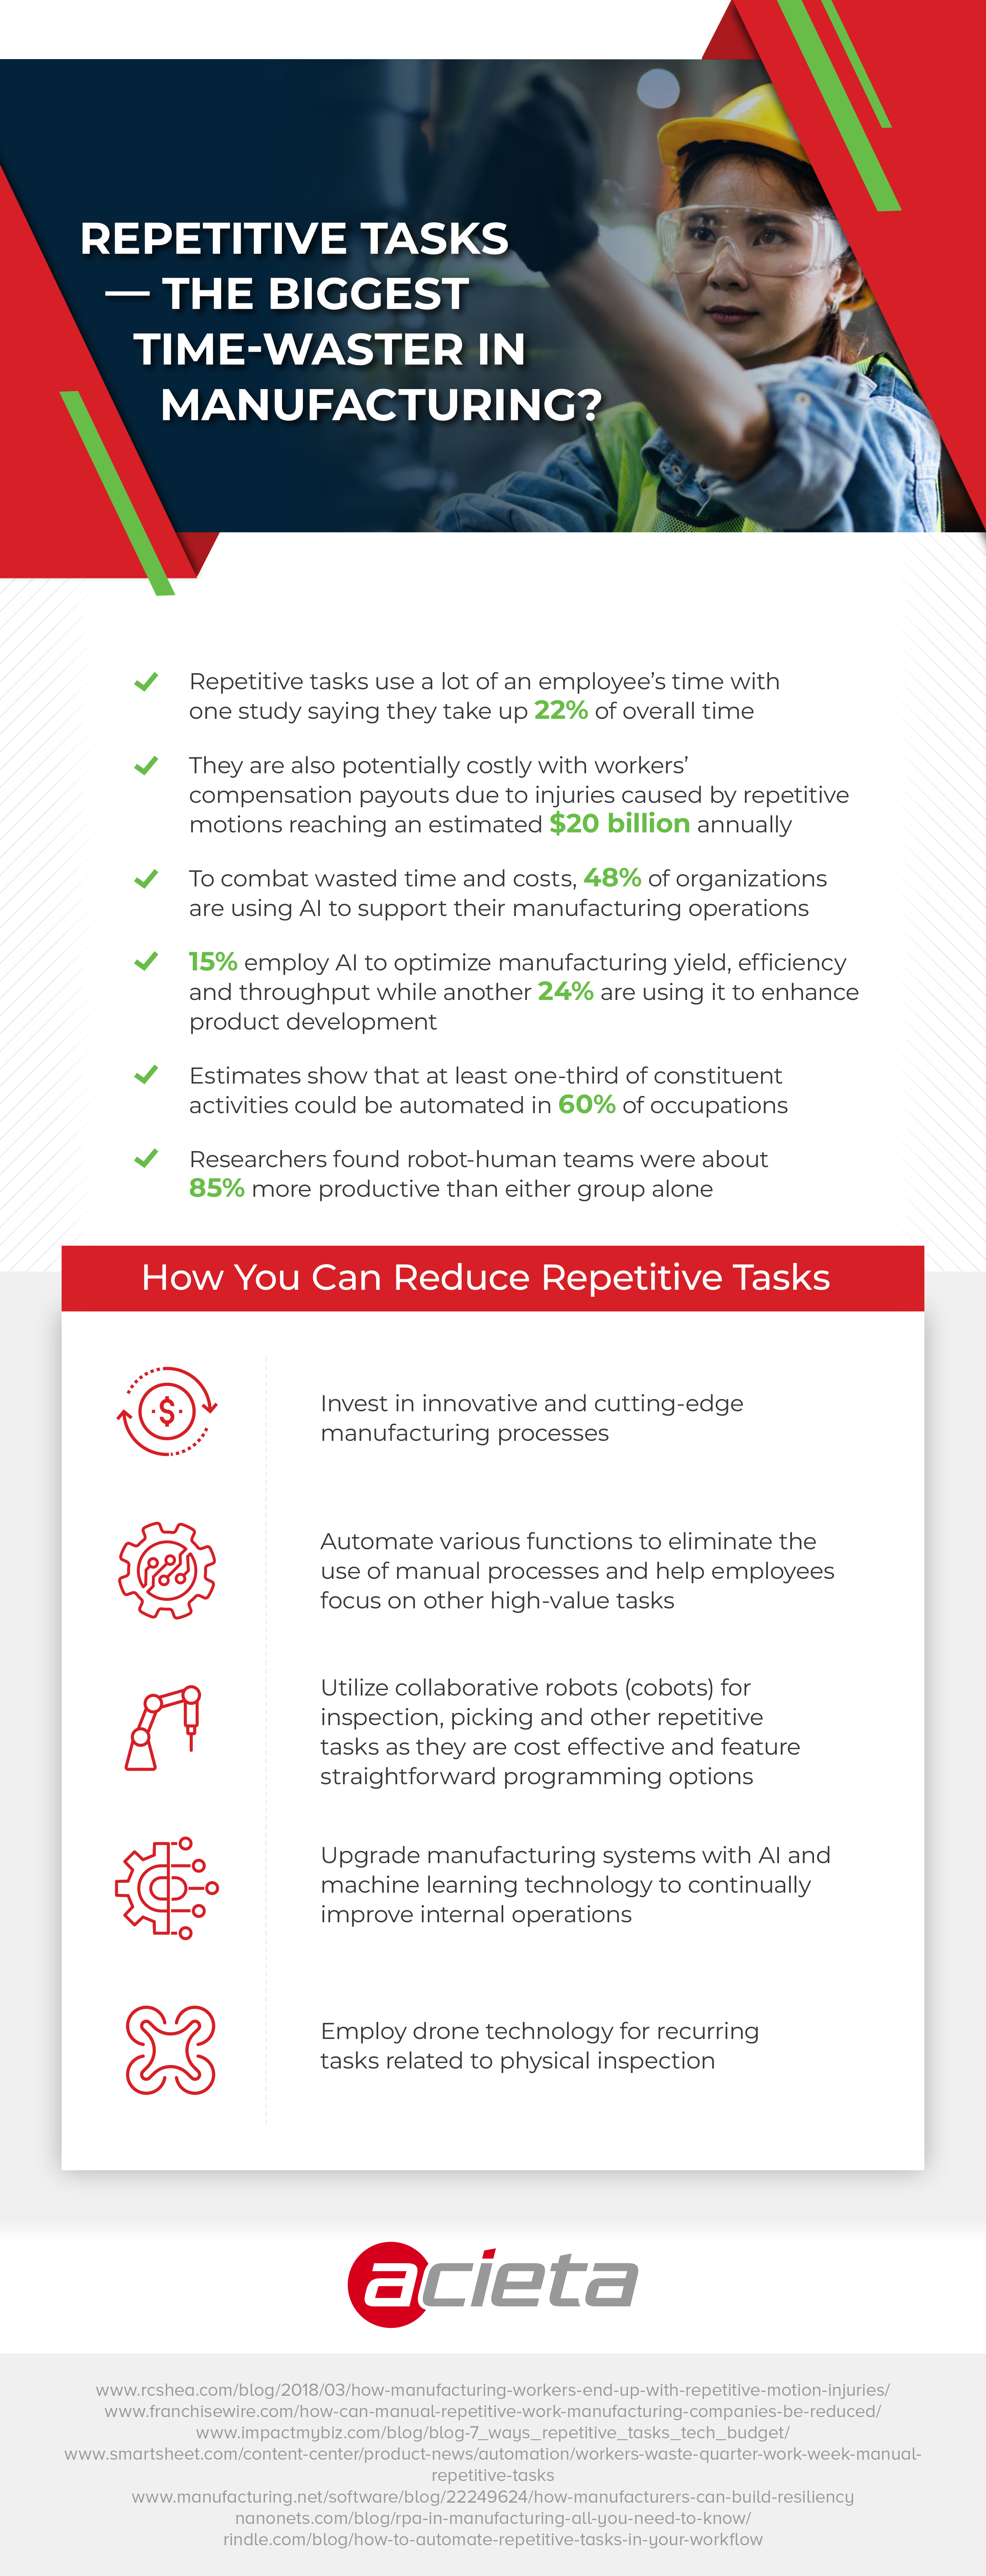 Acieta Eliminating Repetitive Tasks In Manufacturing Infographic, Industry Today